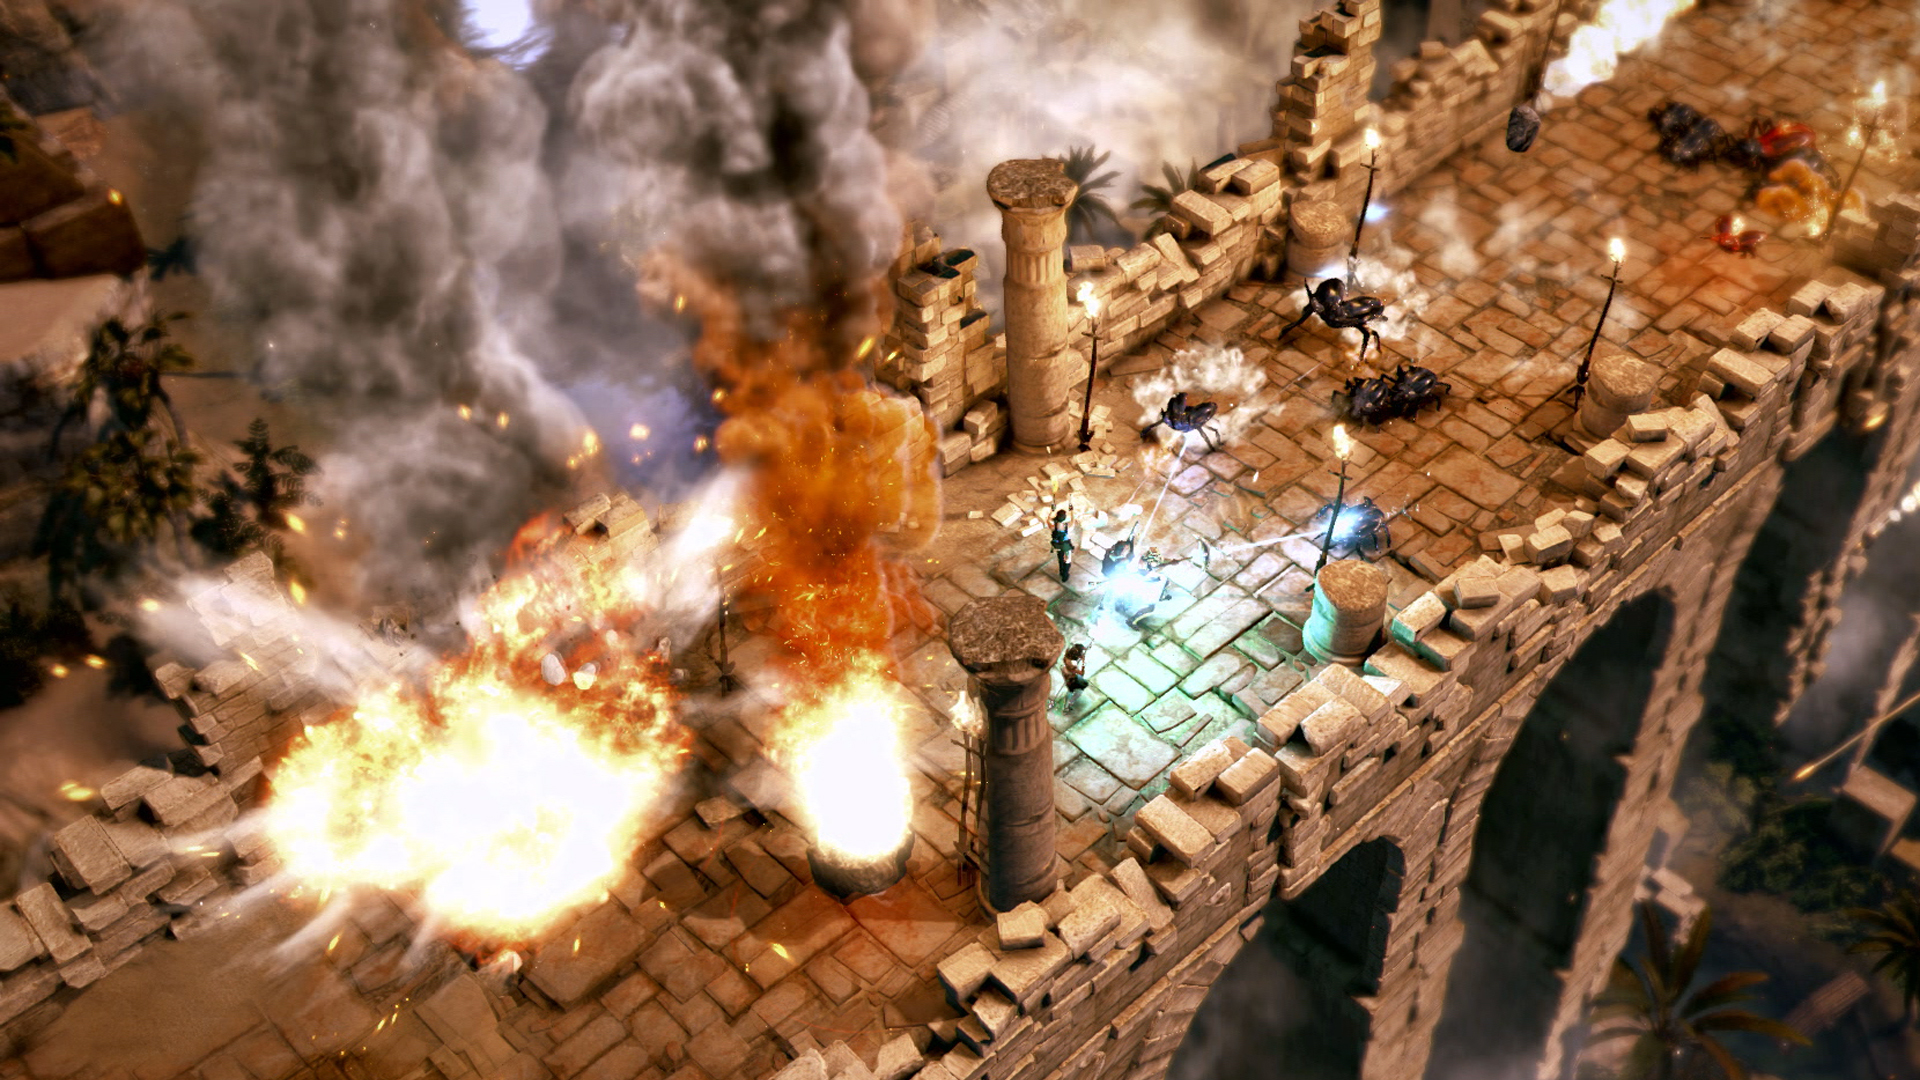 Lara Croft and the Temple of Osiris announced for Xbox One